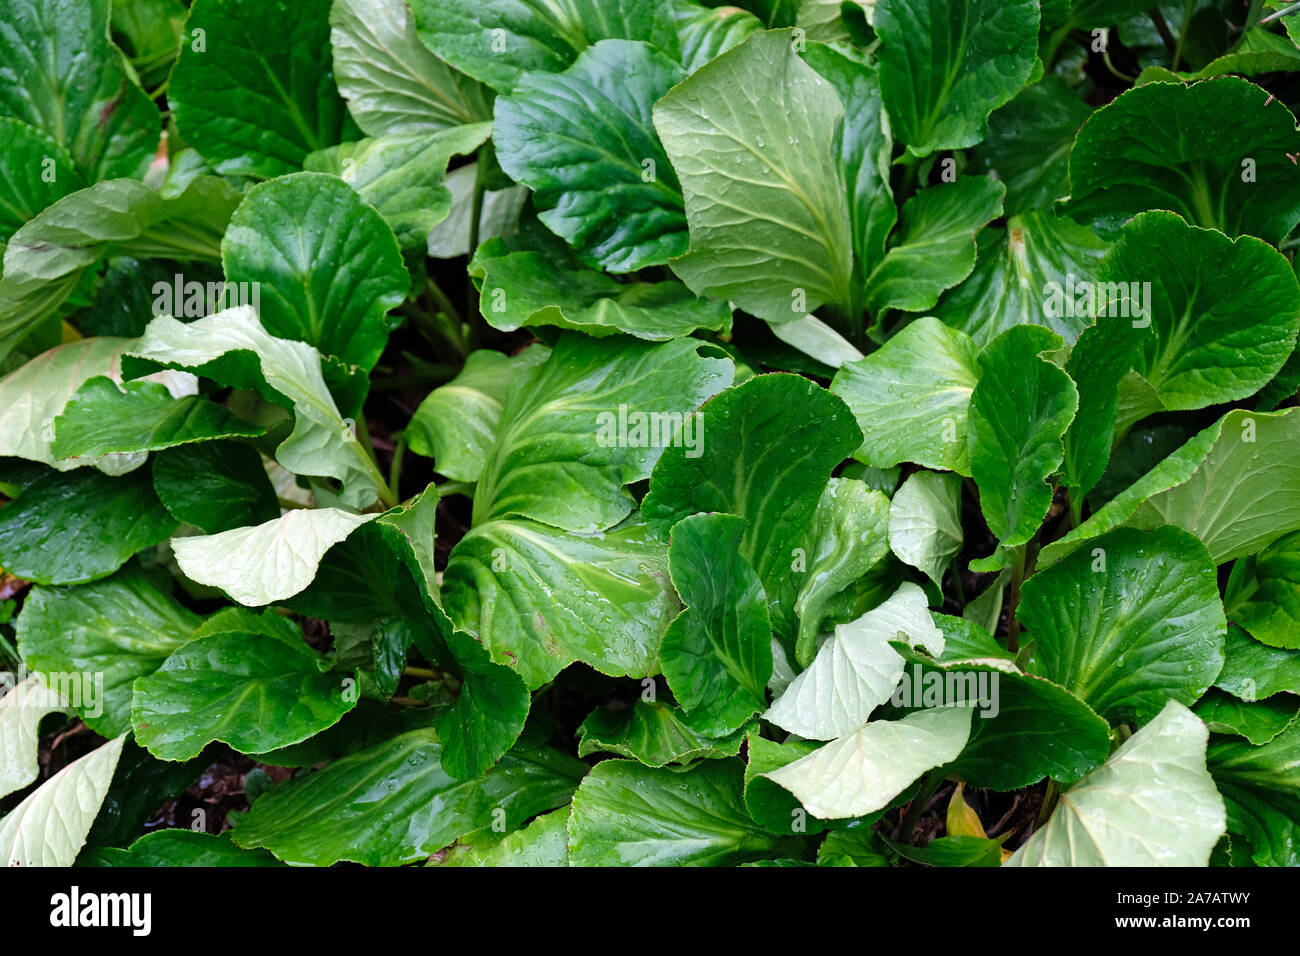 Tatsoi is an Asian variety of Brassica rapa grown for greens. Wet juicy green leaves close-up background. Stock Photo